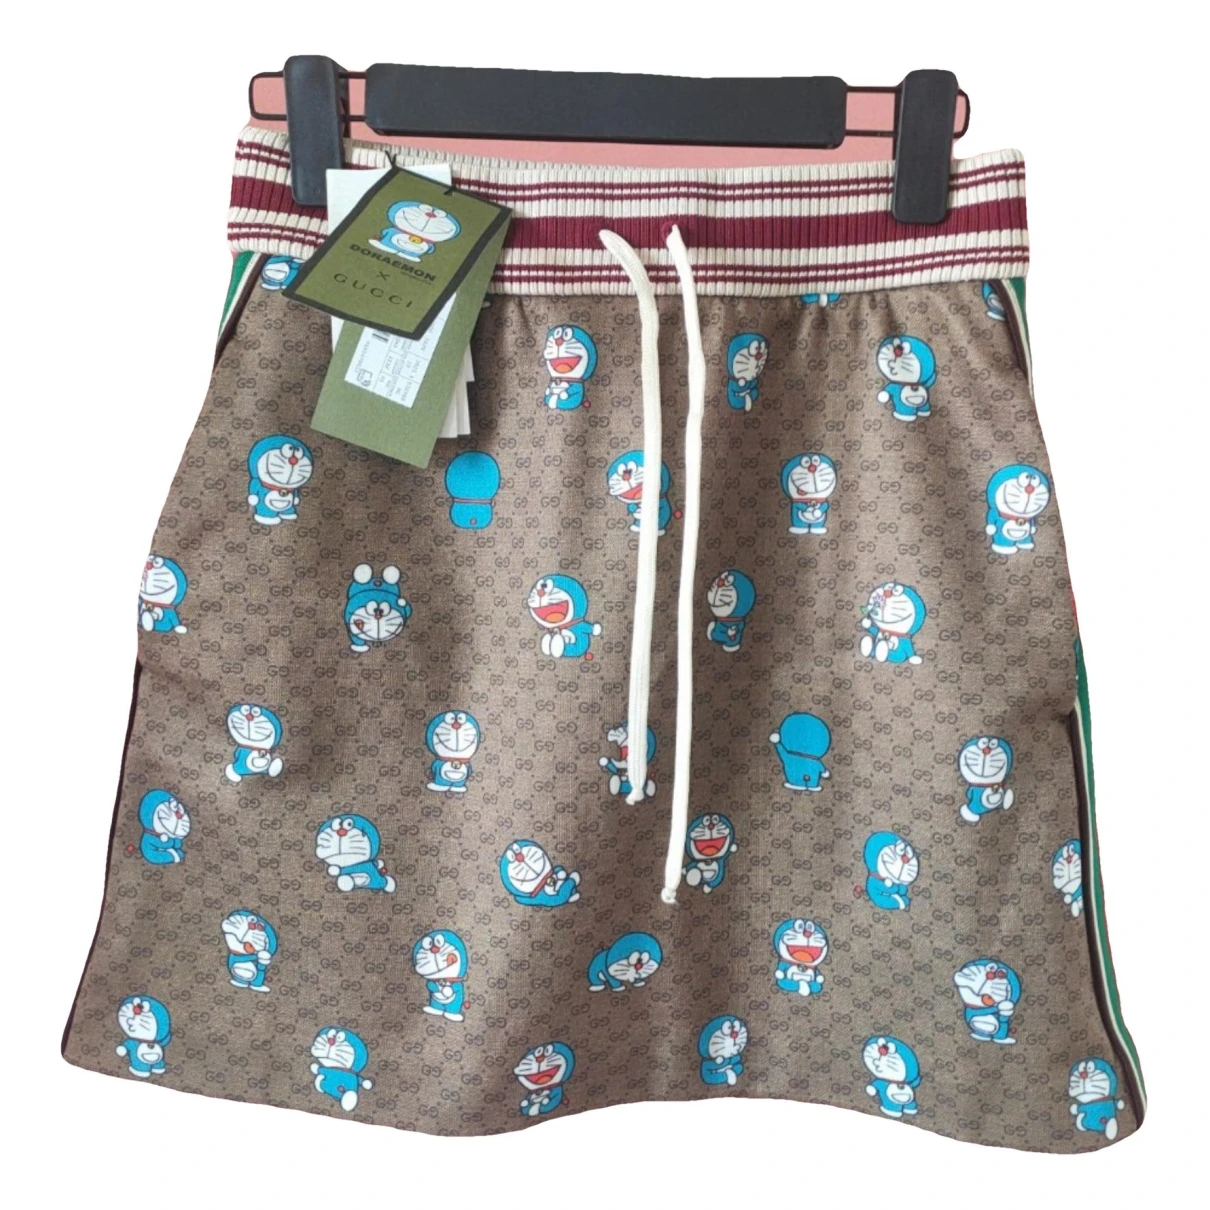 Pre-owned Gucci Mini Skirt In Other